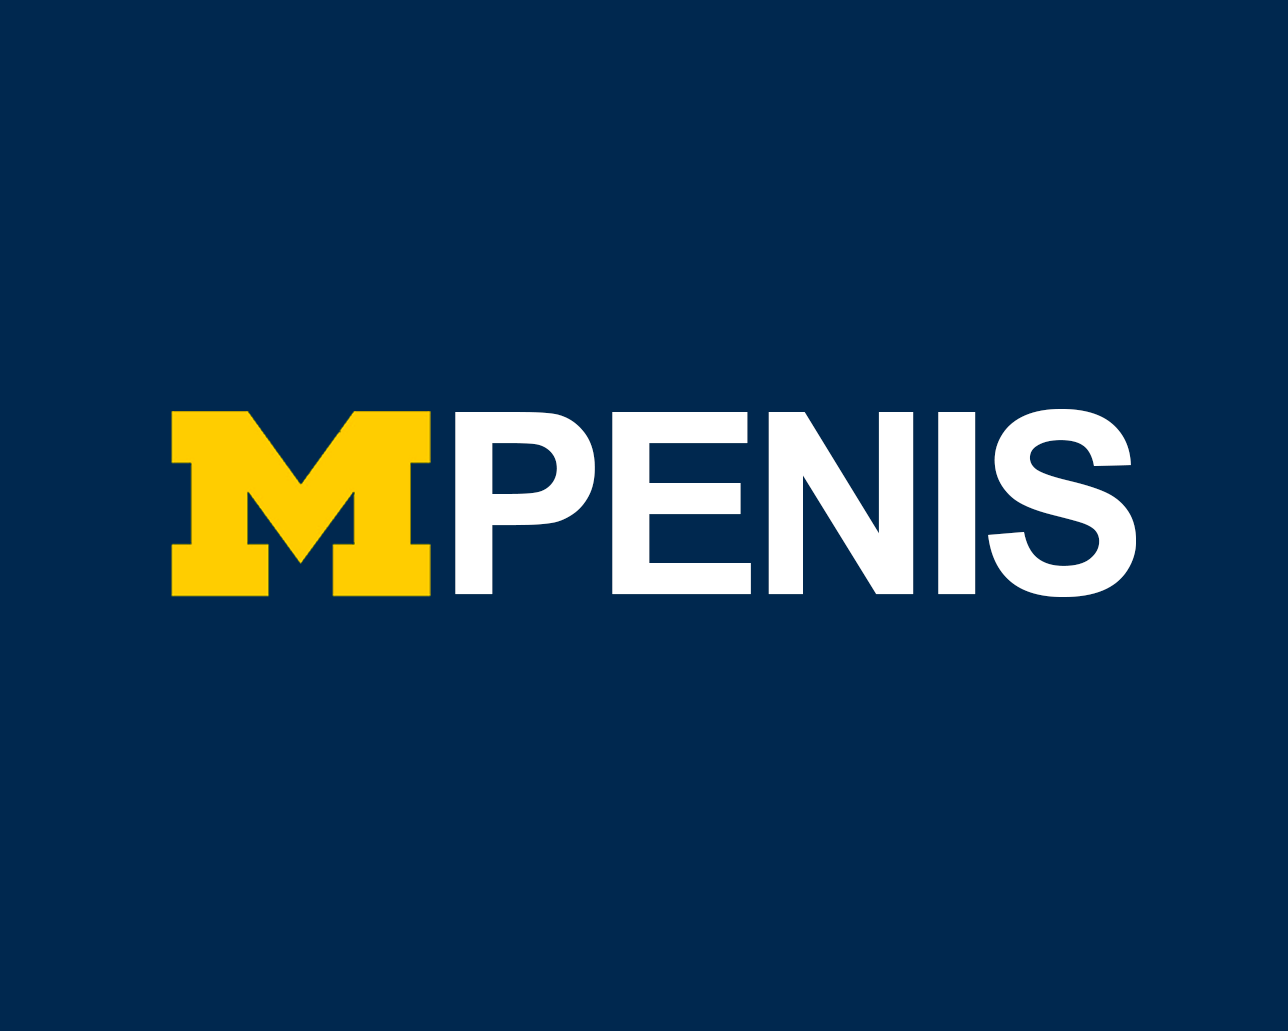 The University of Michigan's premiere social club: M-Penis logo with the UofM block M